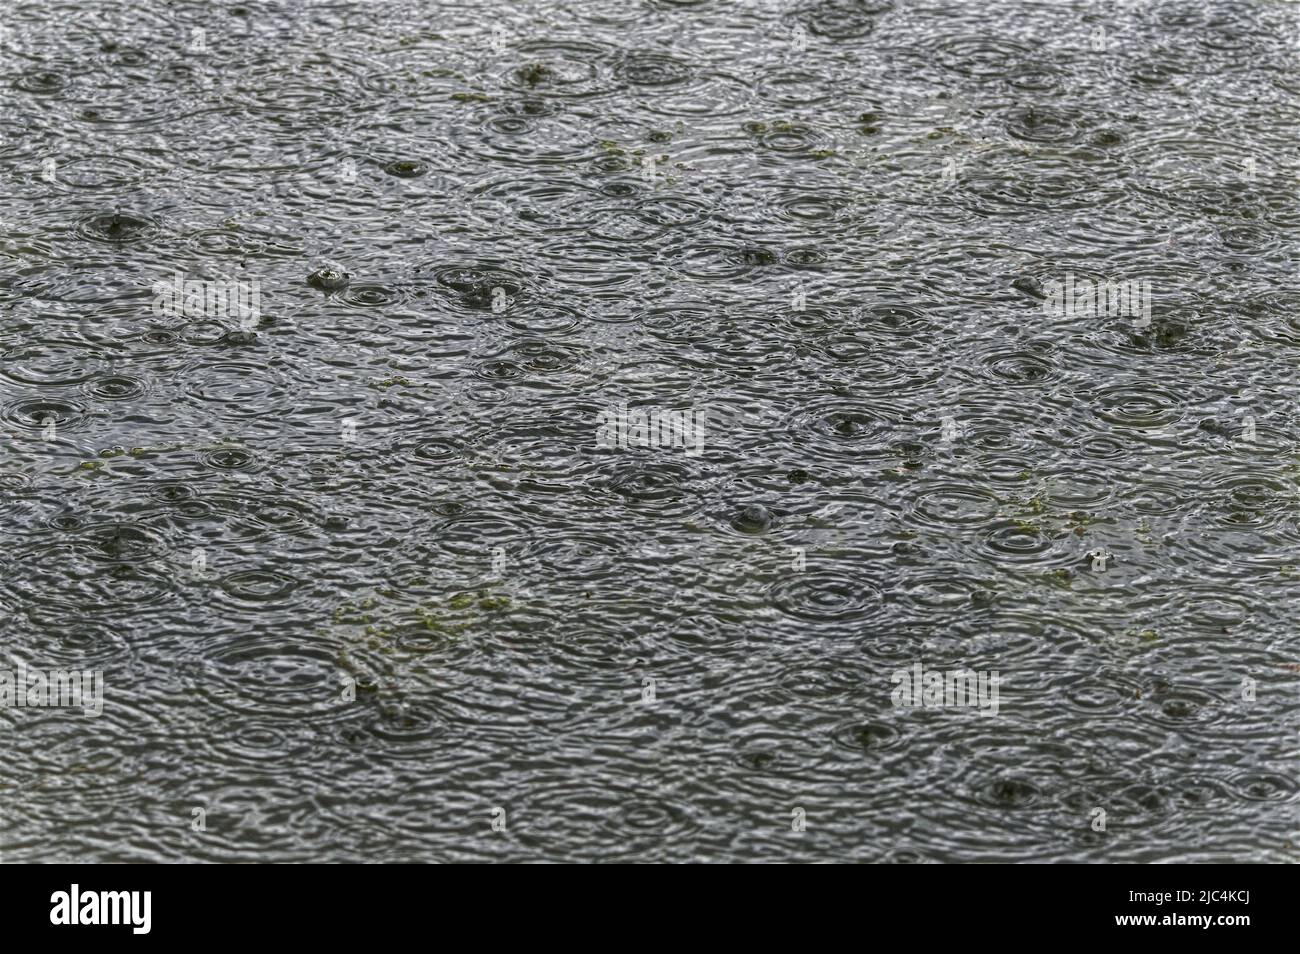 raindrop pattern and shapes on water Stock Photo